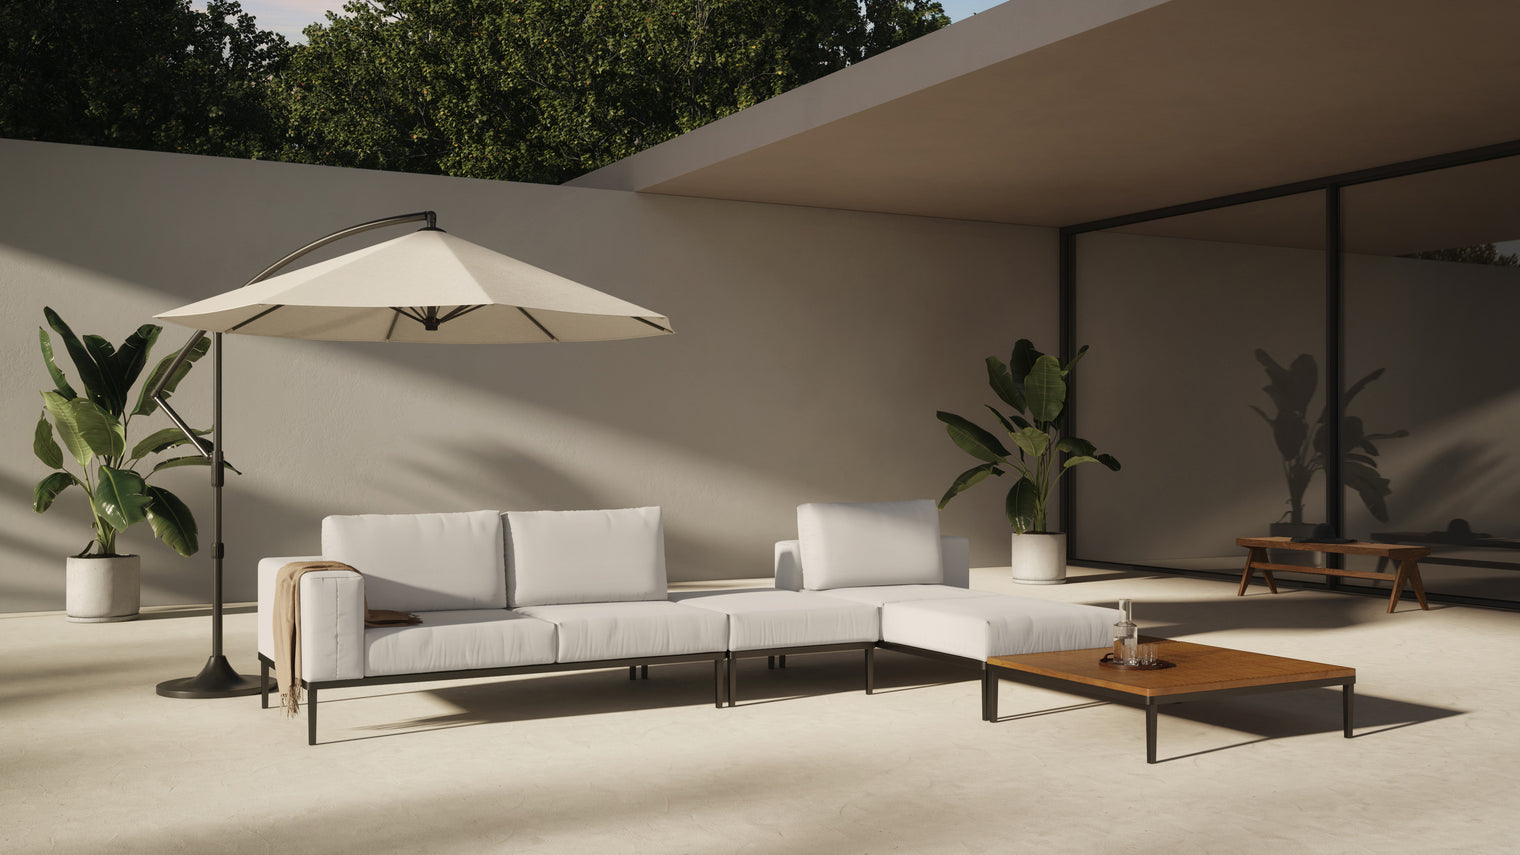 Outdoor Opulence | Whether you're lounging in solitude or hosting a gathering with loved ones, the Marcus Collection sets the stage for unforgettable outdoor moments. Immerse yourself in luxury and style with the Marcus Collection, where outdoor living reaches new heights of sophistication.
